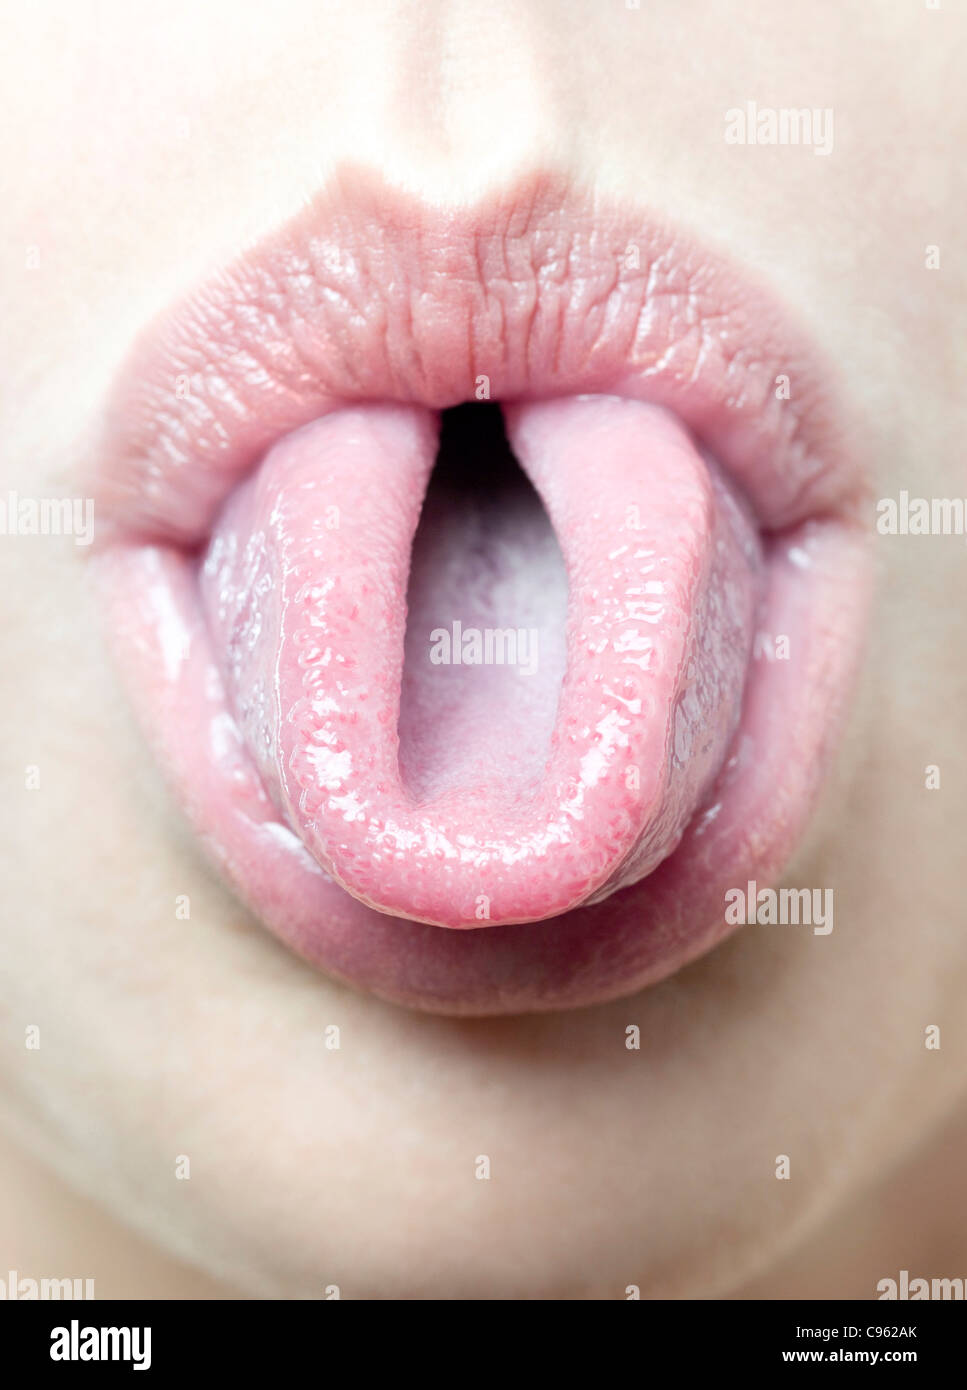 Woman rolling her tongue Stock Photo - Alamy